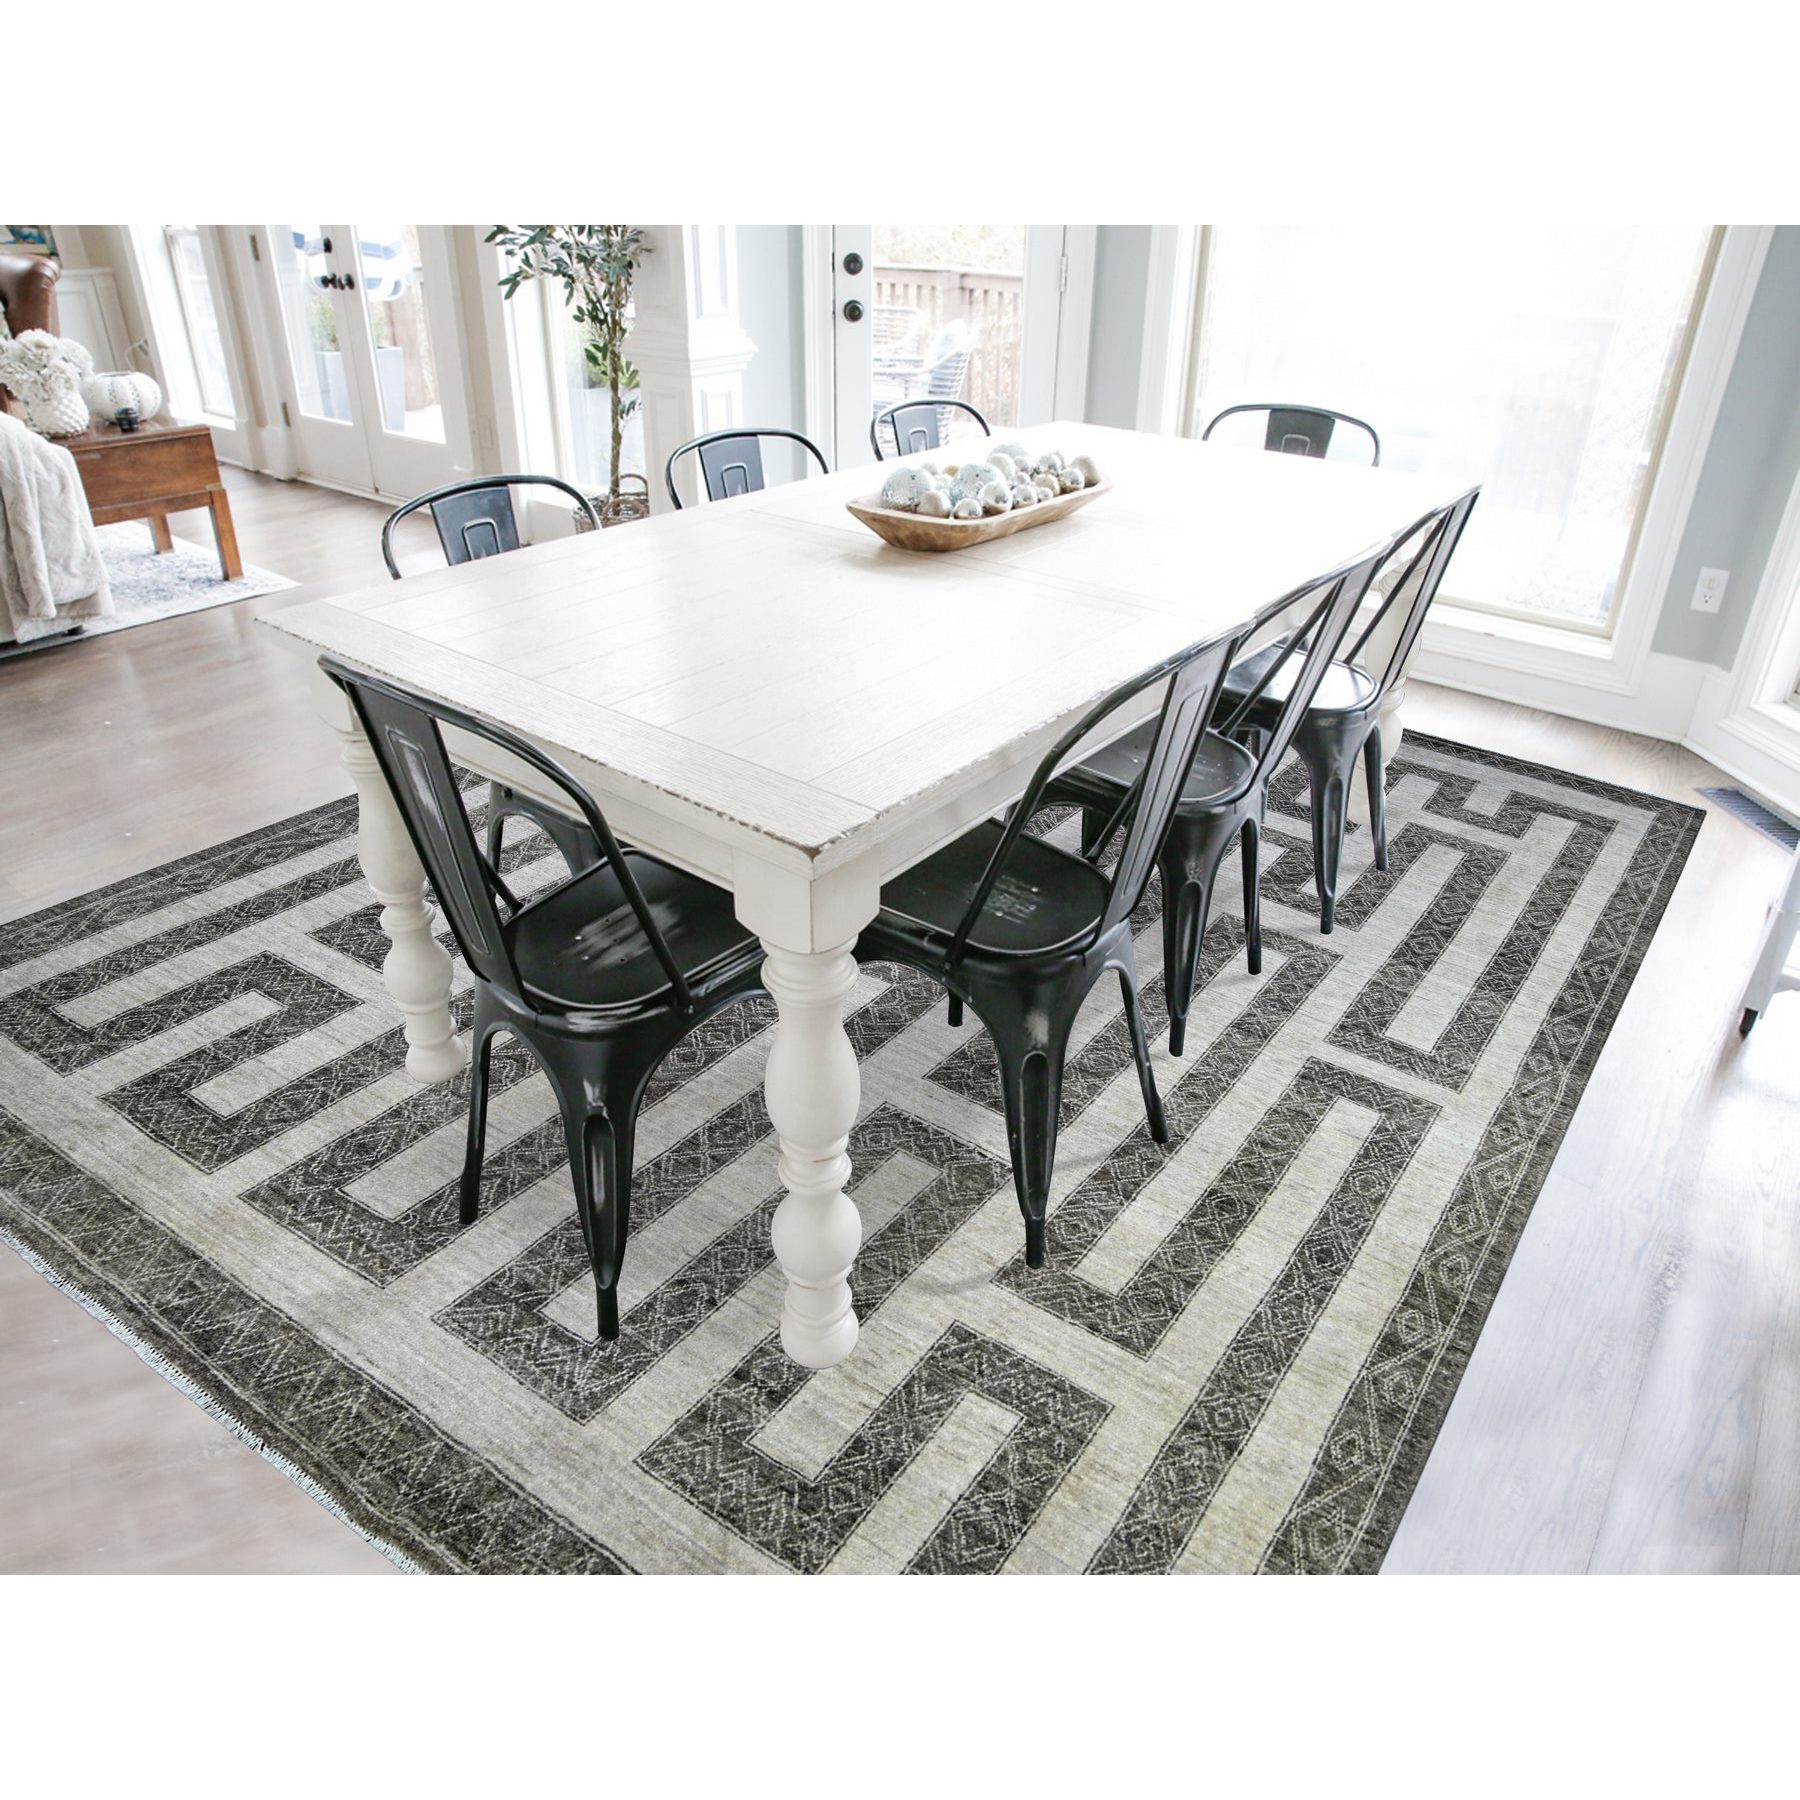 transitional Wool Hand-Knotted Area Rug 9'0